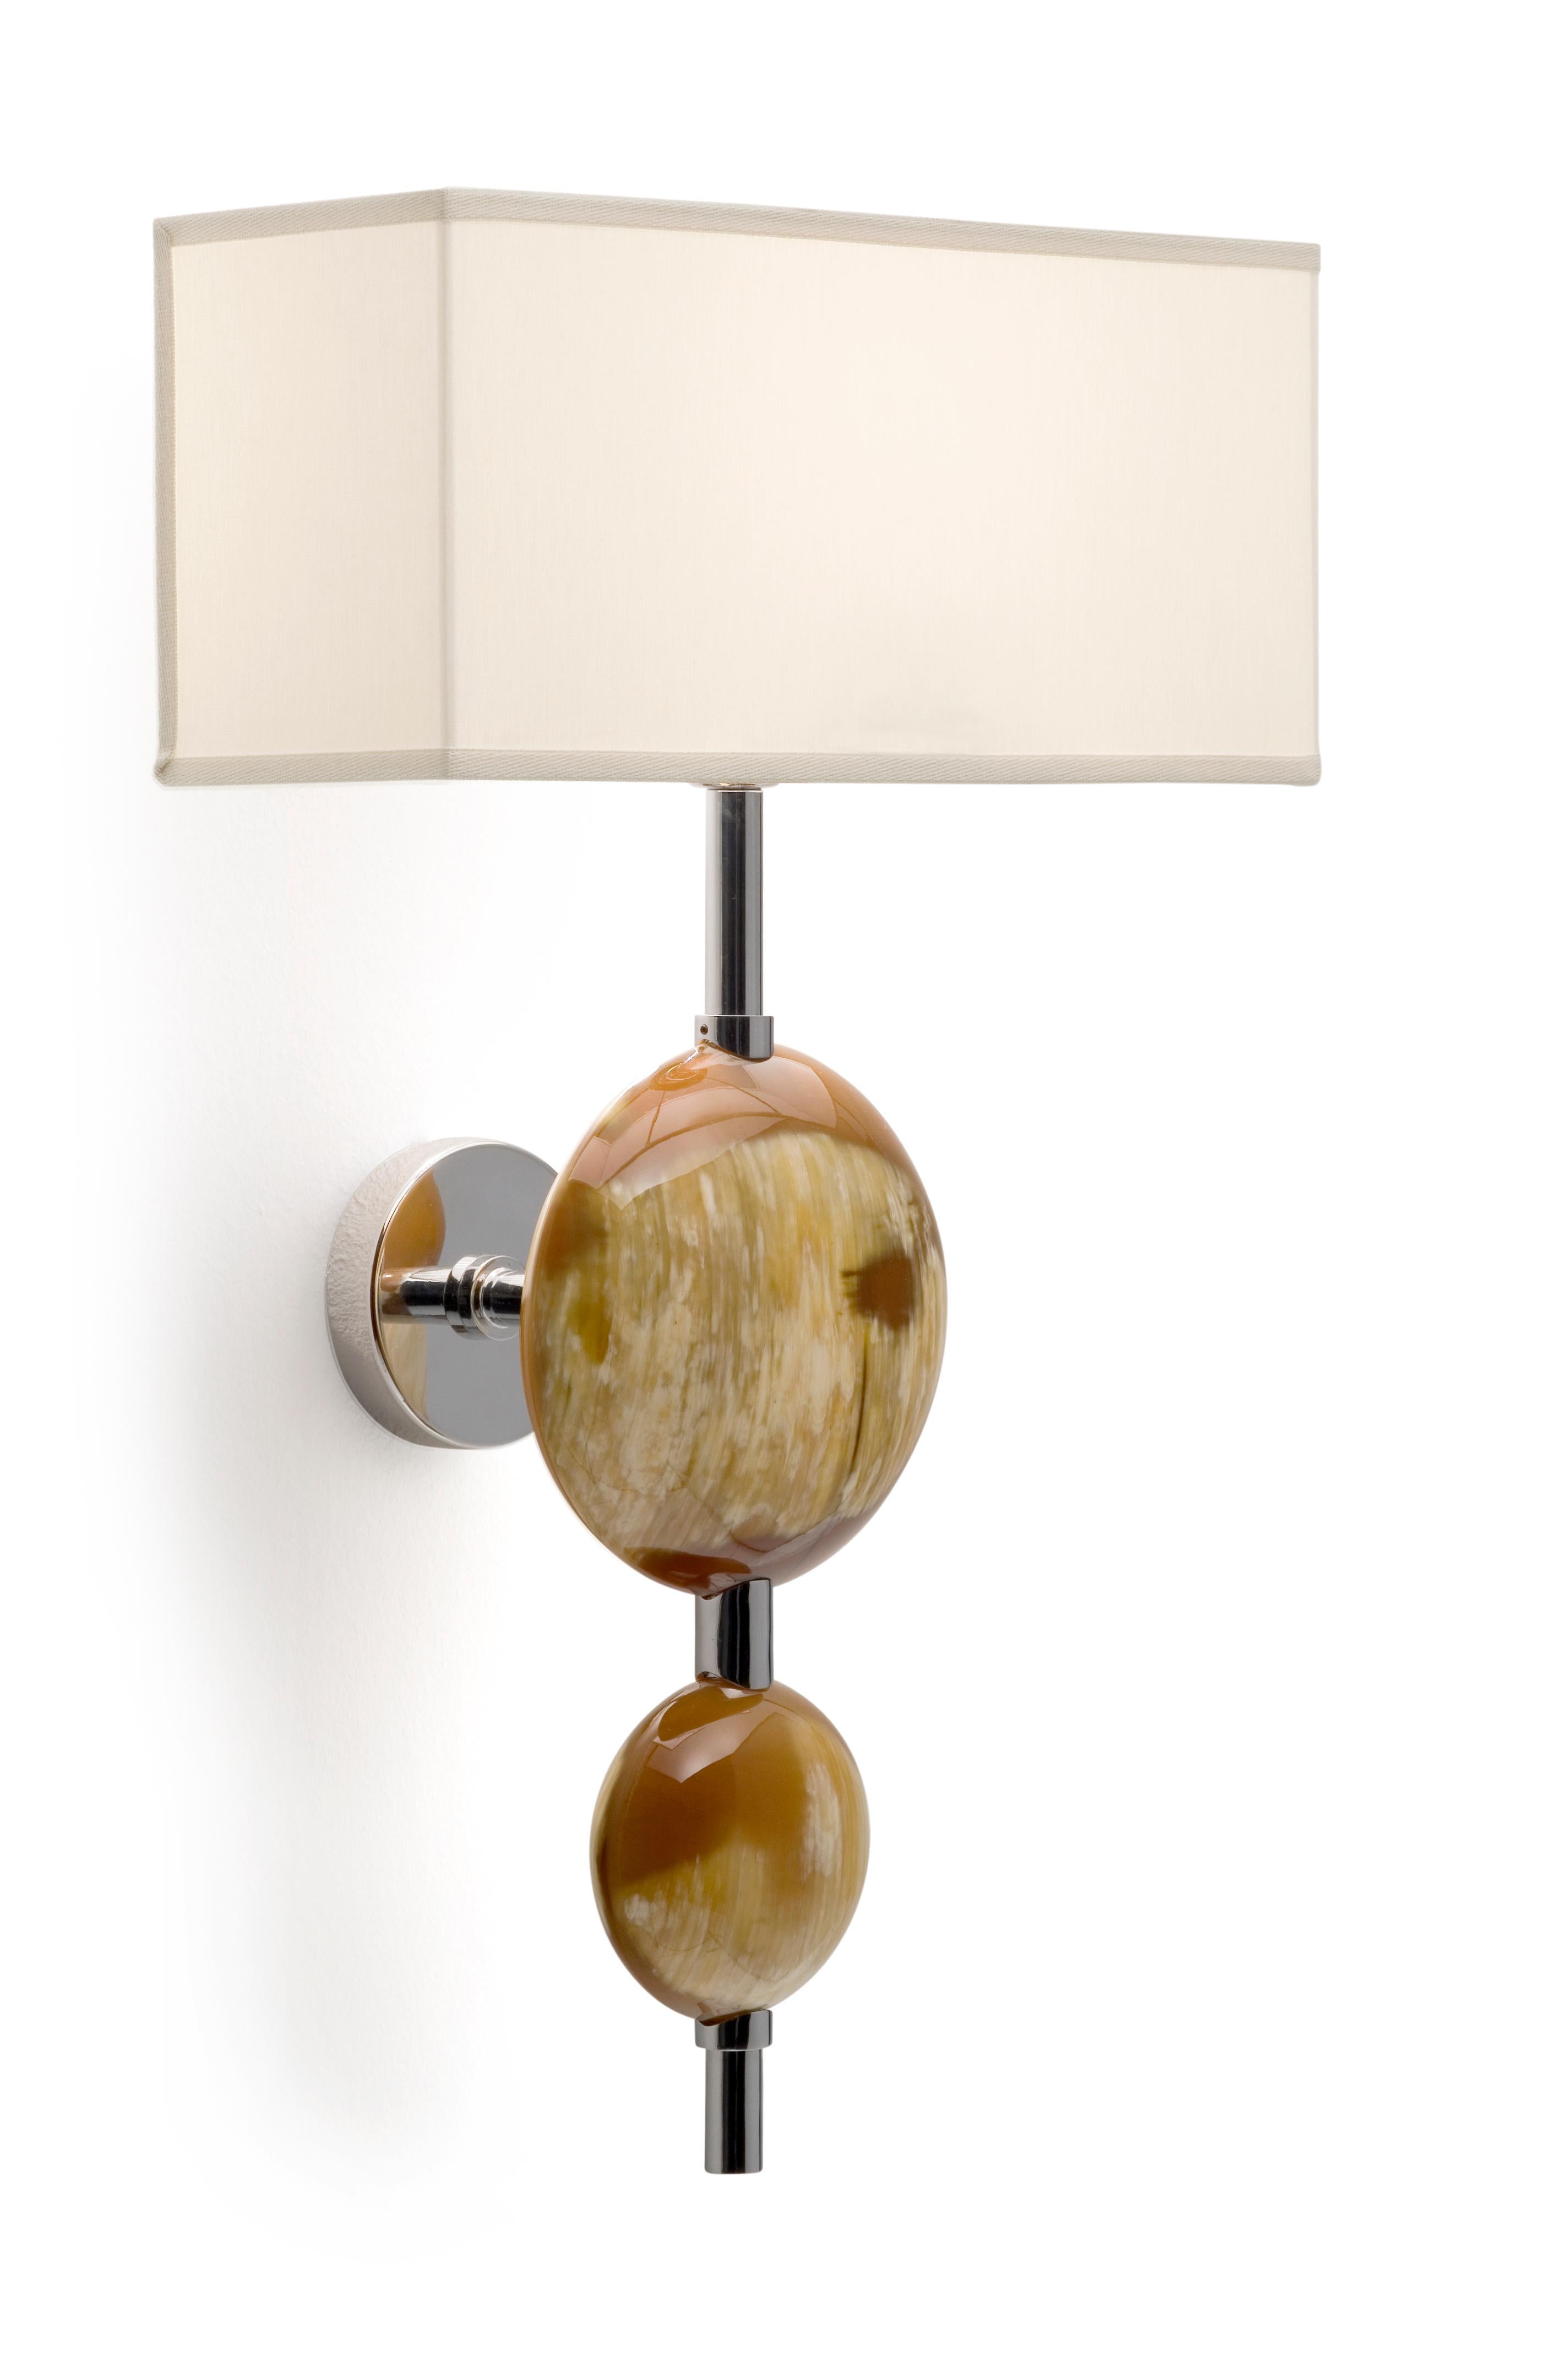 Wall sconce in horn and stainless steel. Lampshade in ivory shantung.

Overall Dimensions: W 32 x D 21 x H 52 cm.